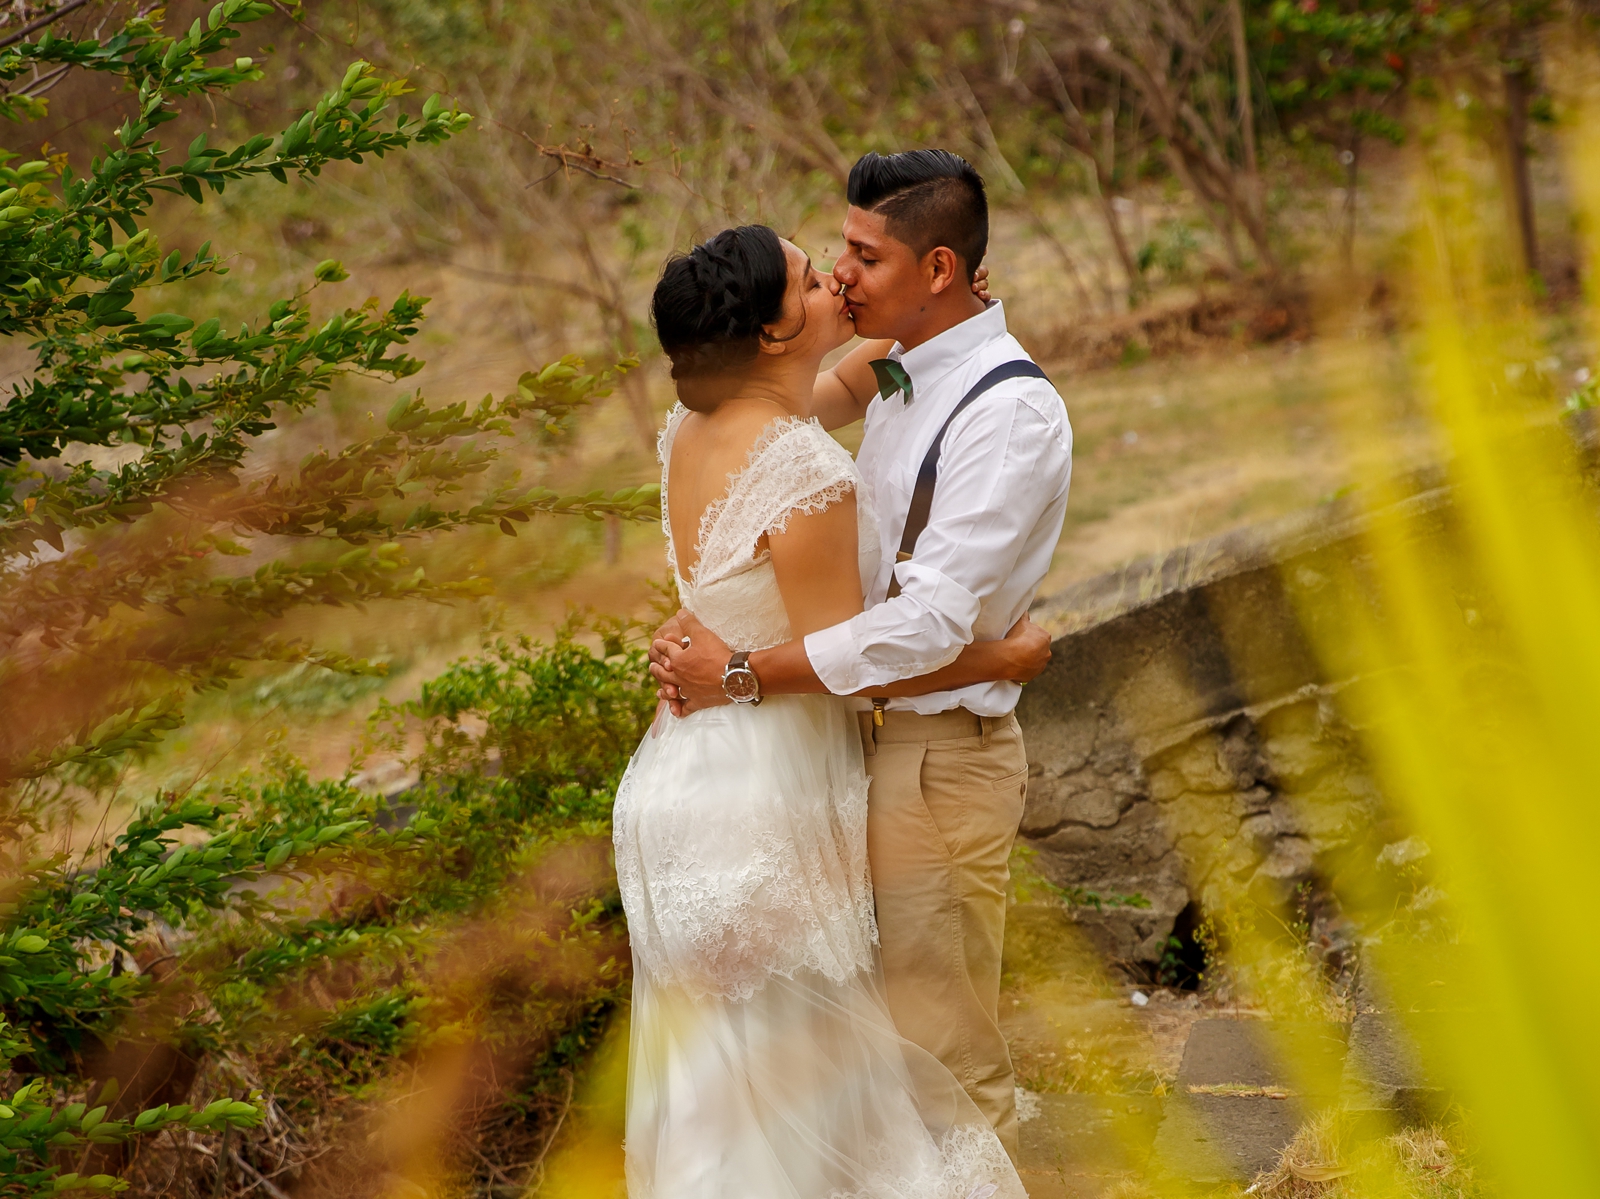 This couple had an adventure wedding in Nicaragua.